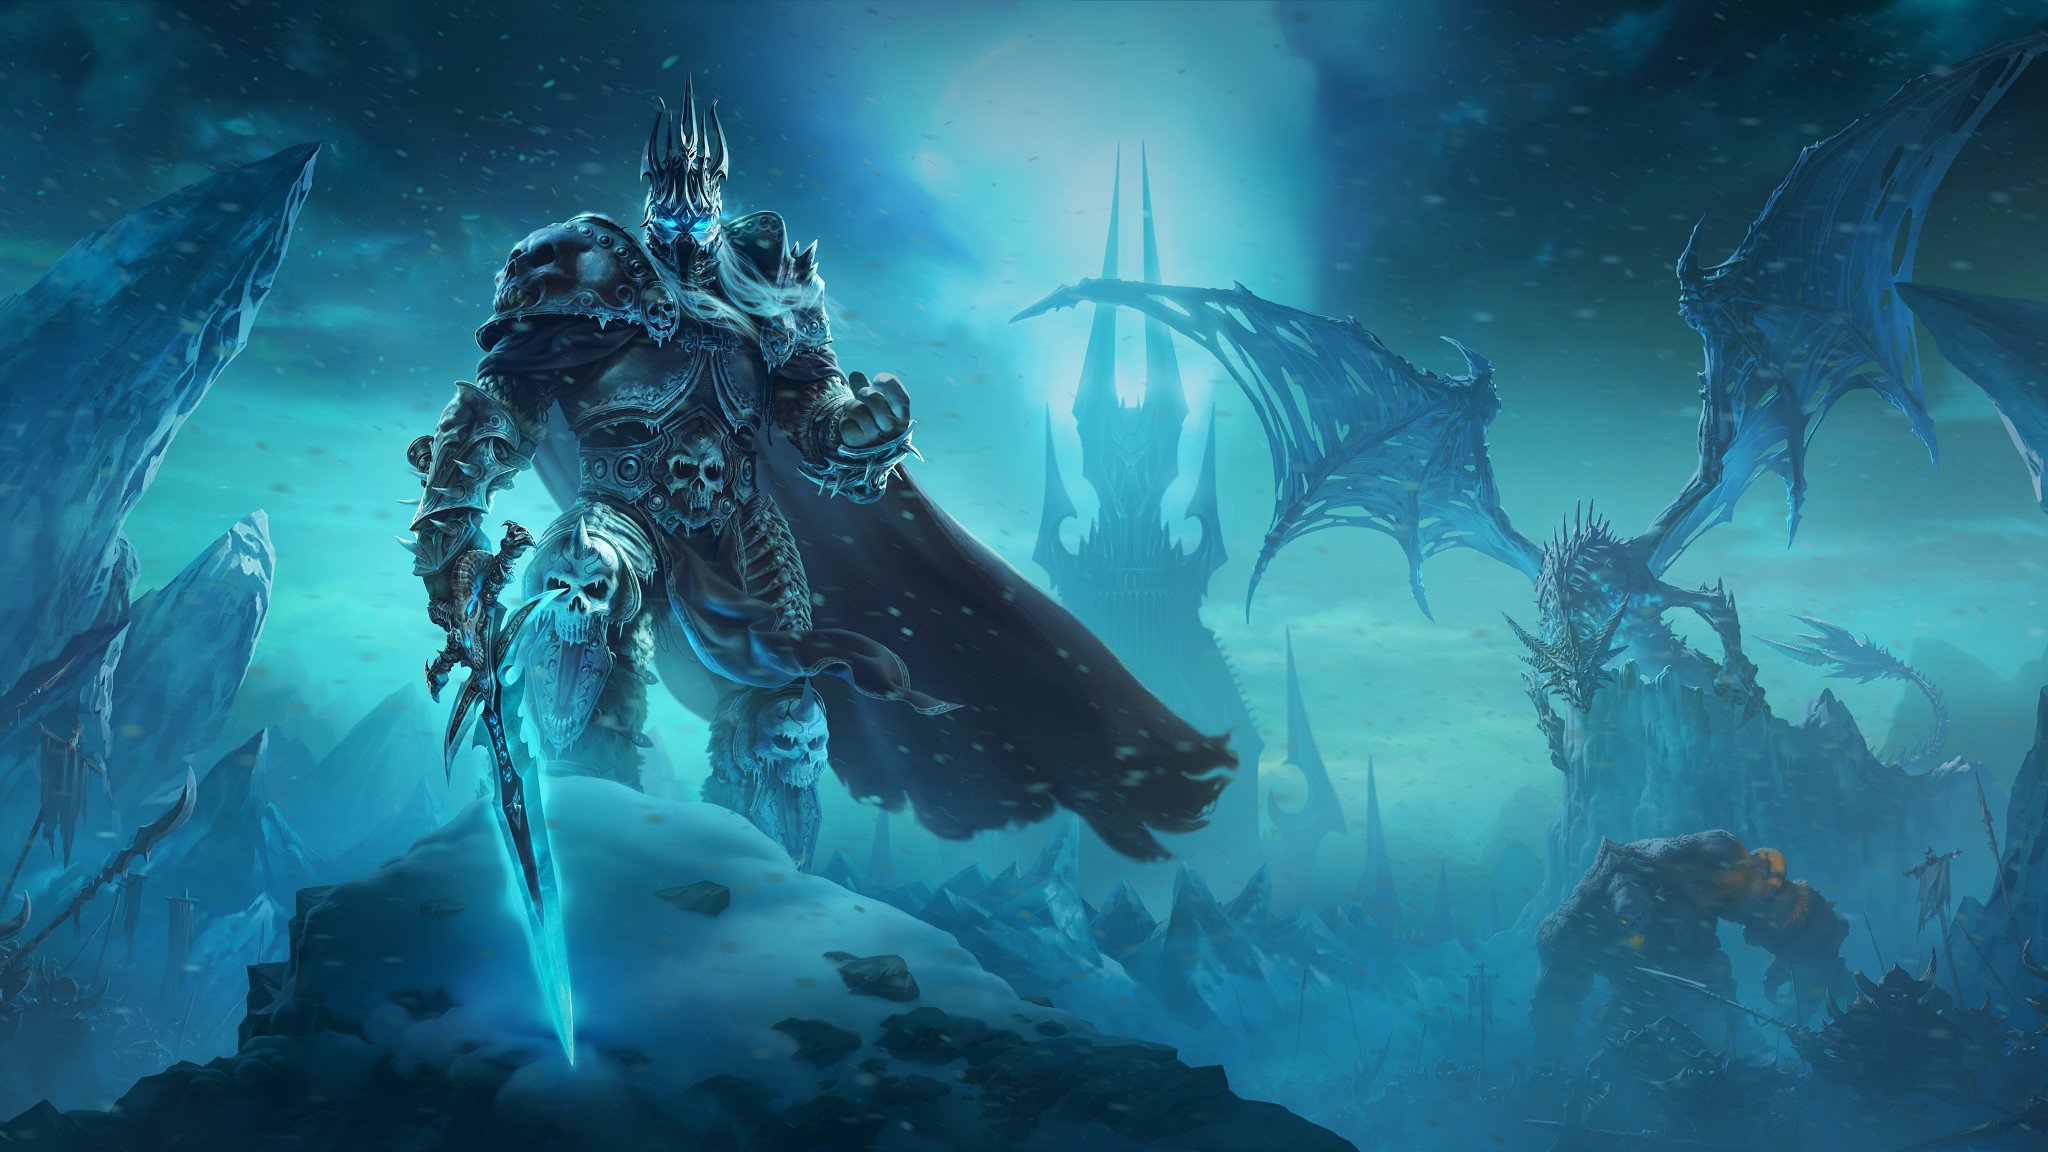 Will World of Warcraft ever come to consoles?, The Gamers Dreams, thegamersdreams.com